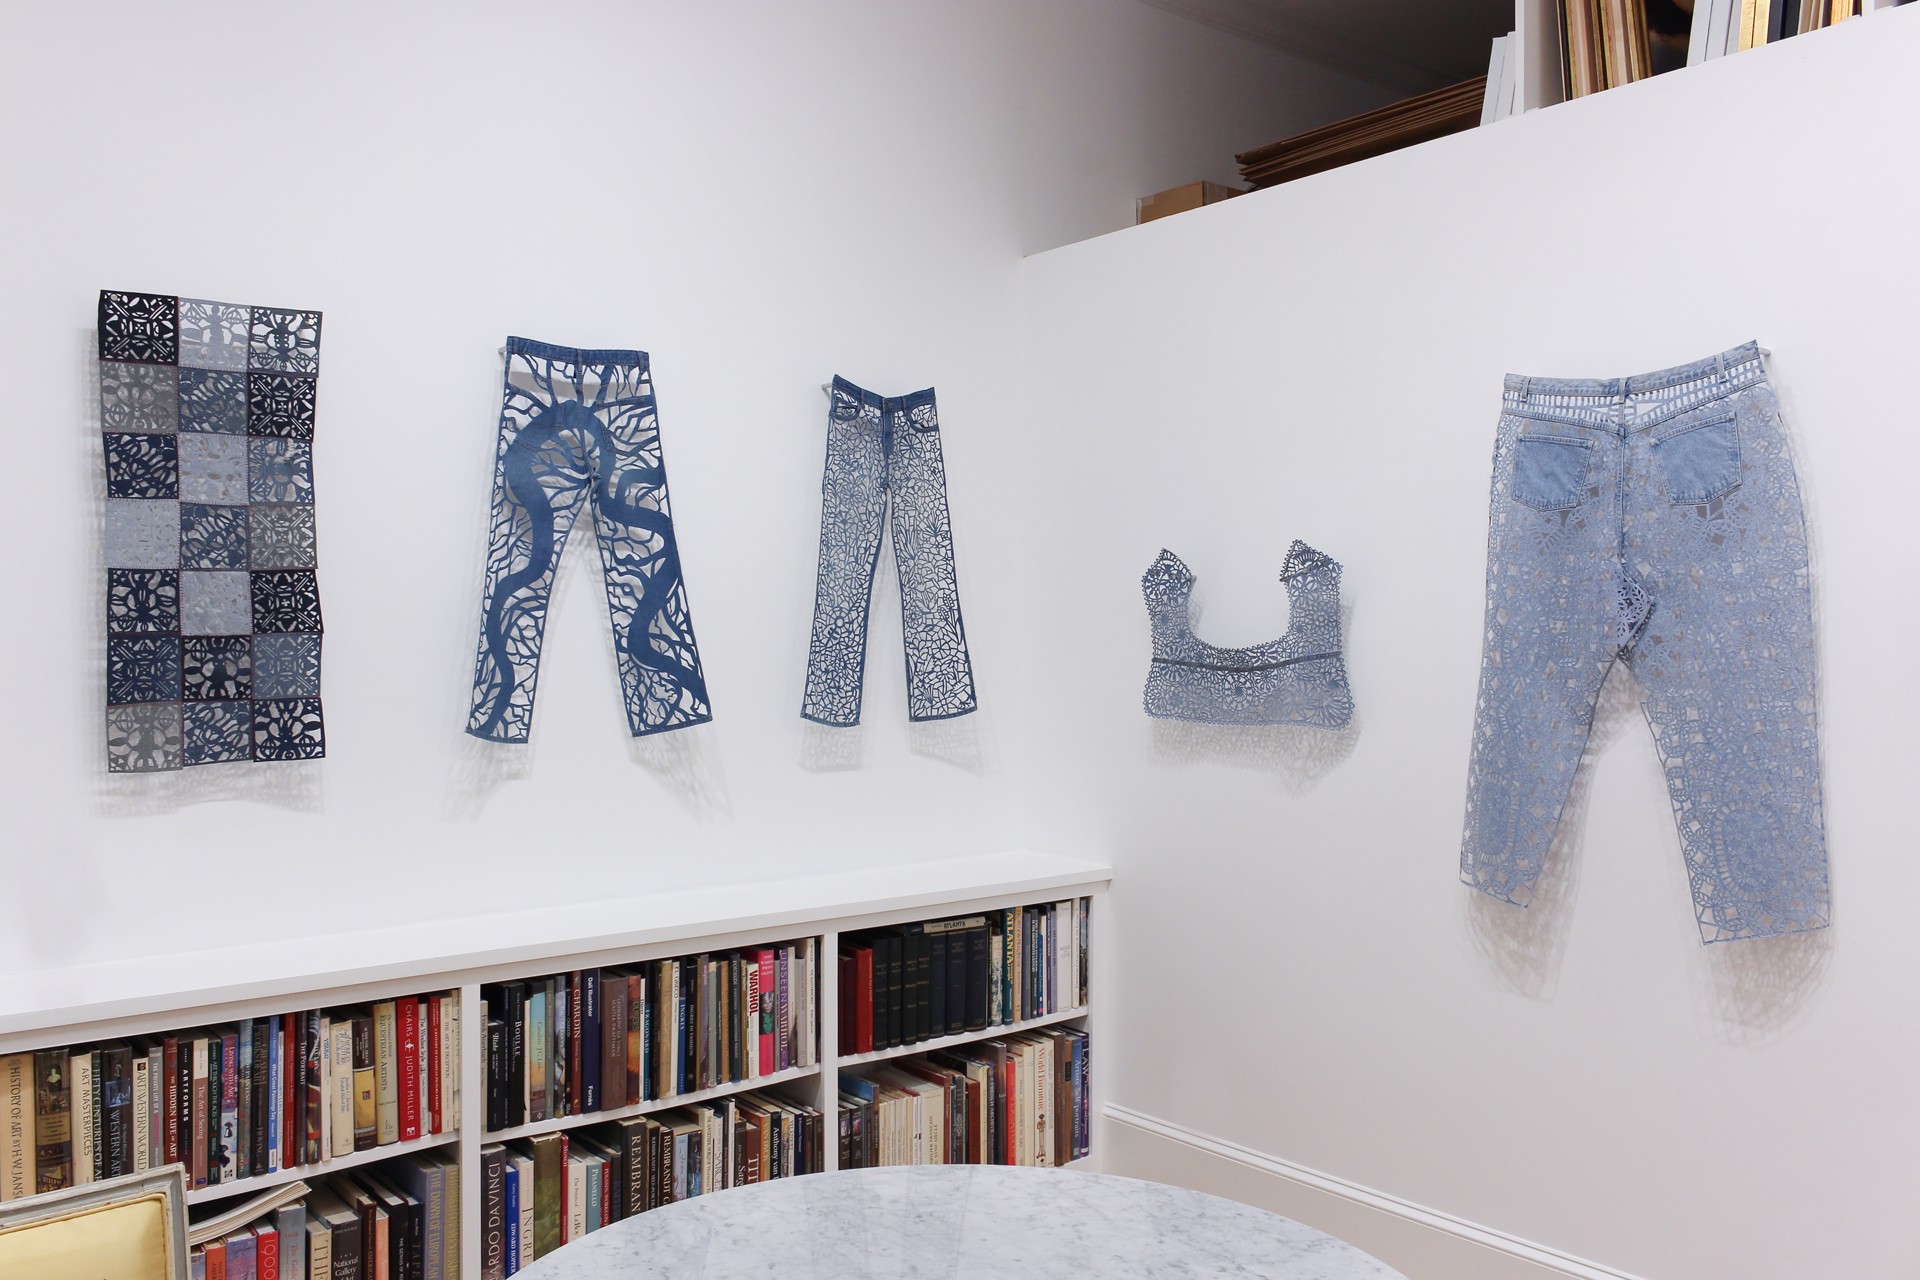 Meticulously Distressed Denim Jeans, Honiton Lace by Libby Newell